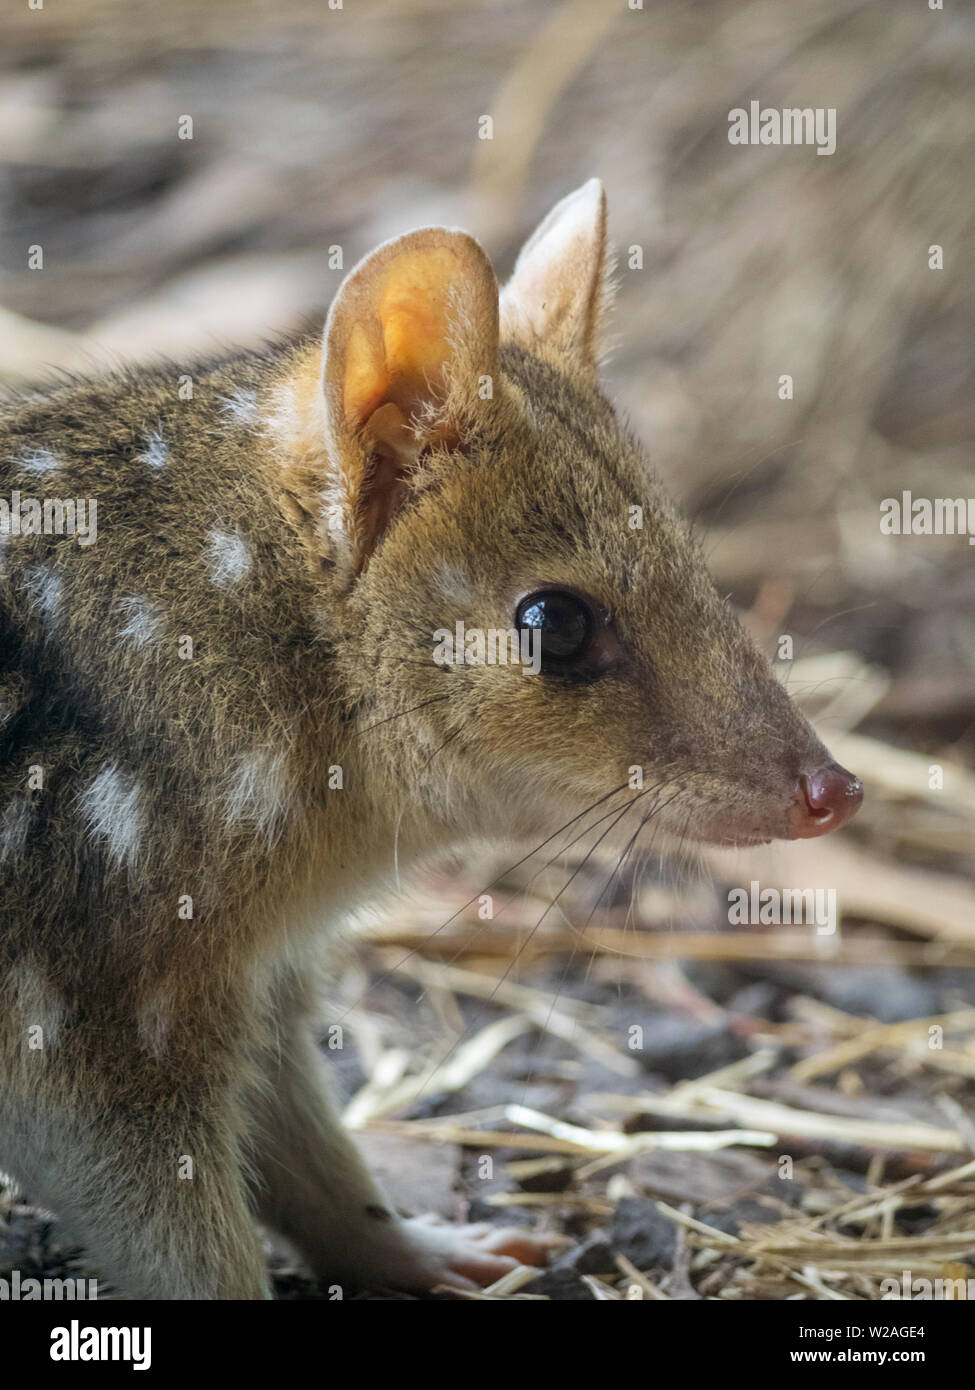 Eastern quoll head close-up Stock Photo